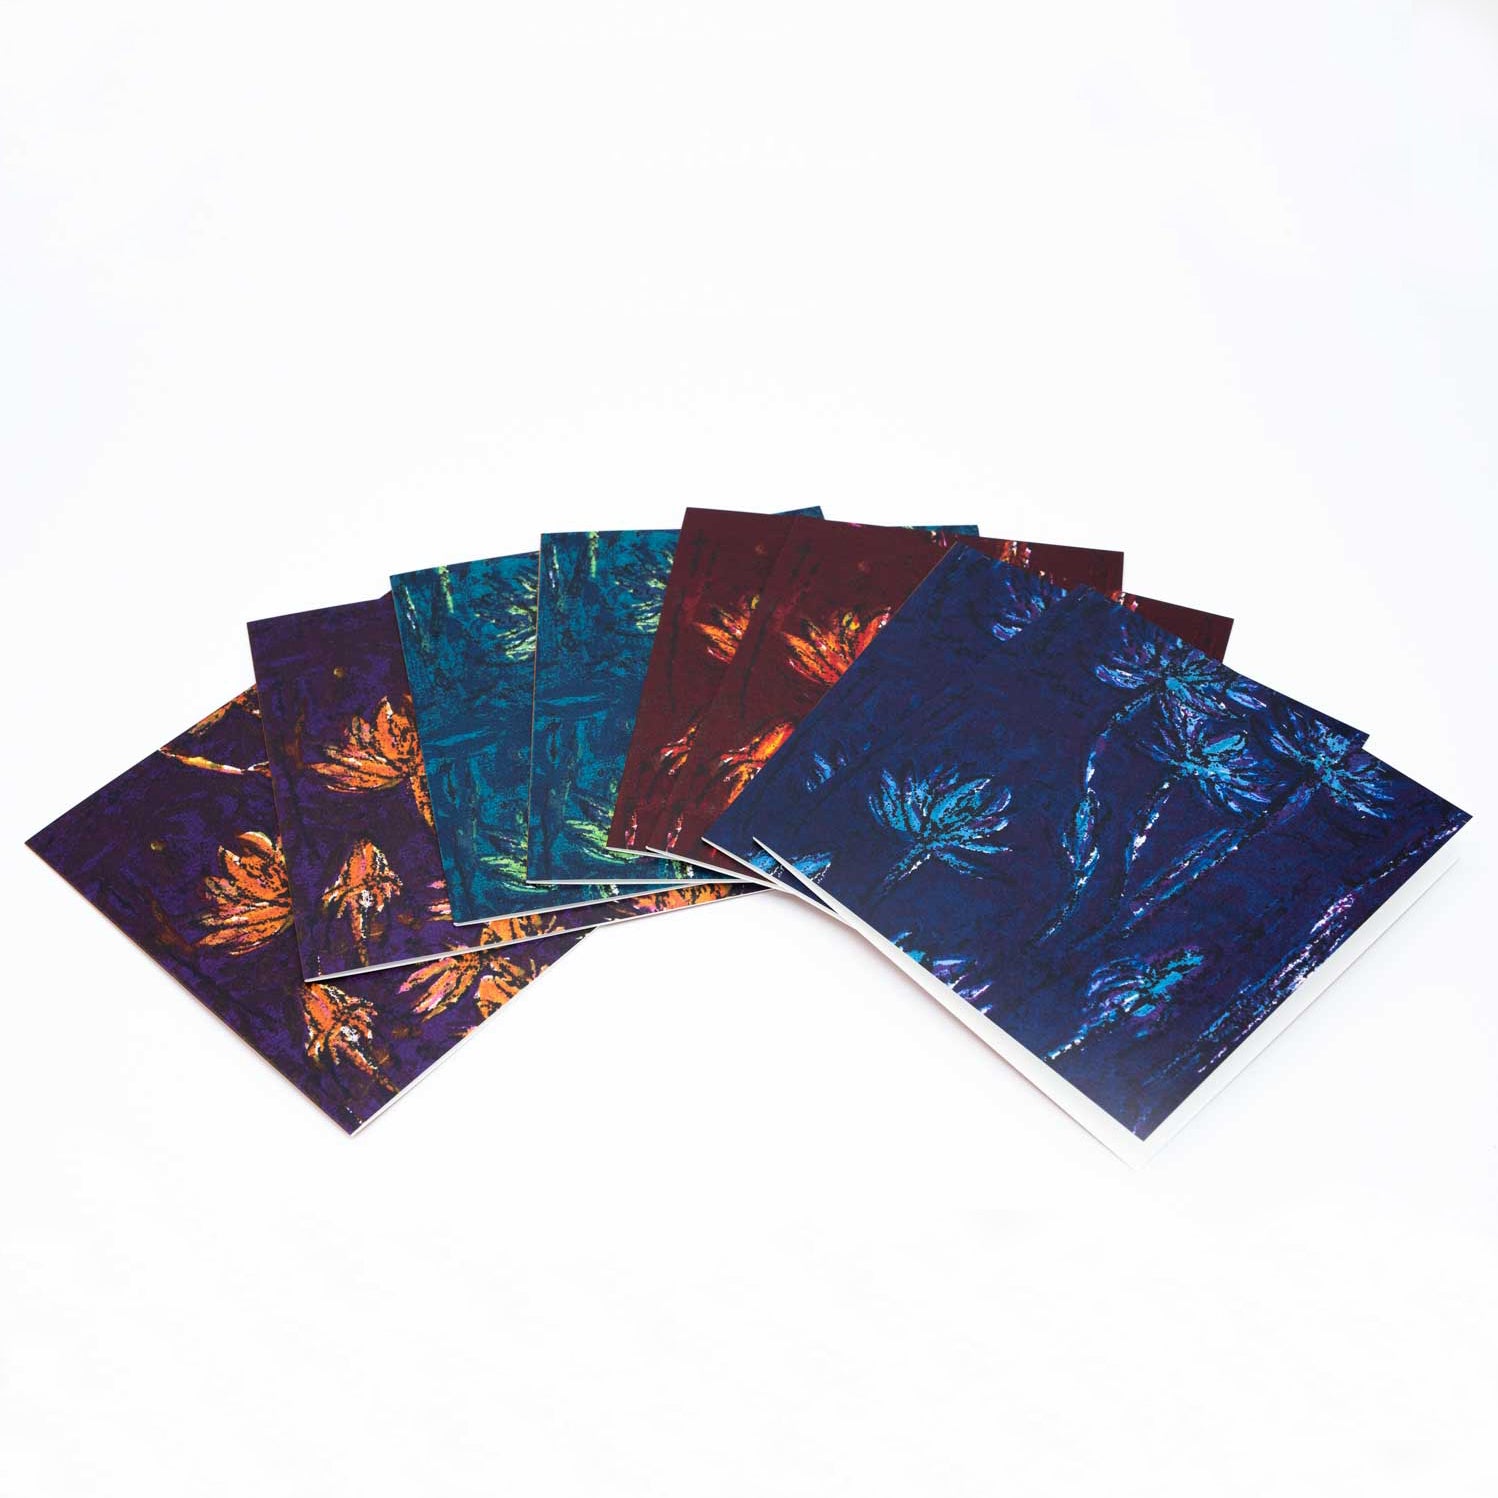 The eight cards placed in a fan shape on a white backdrop. There are two of each colourway artwork. The envelopes are white.